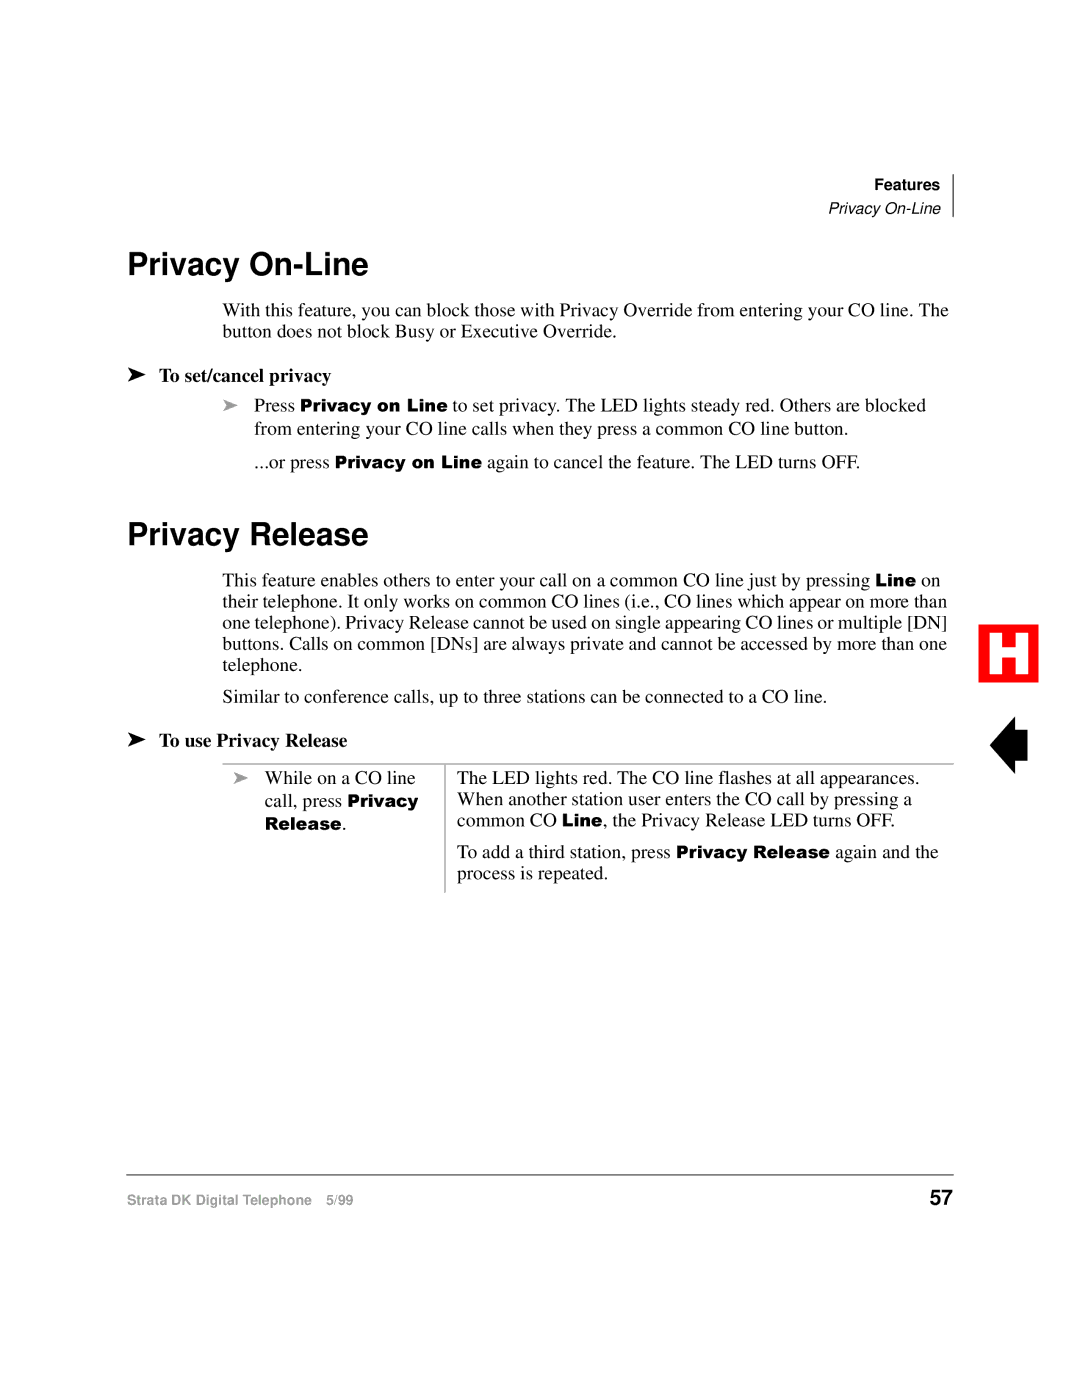 Toshiba Digital Telephone manual Privacy On-Line, To set/cancel privacy, To use Privacy Release 